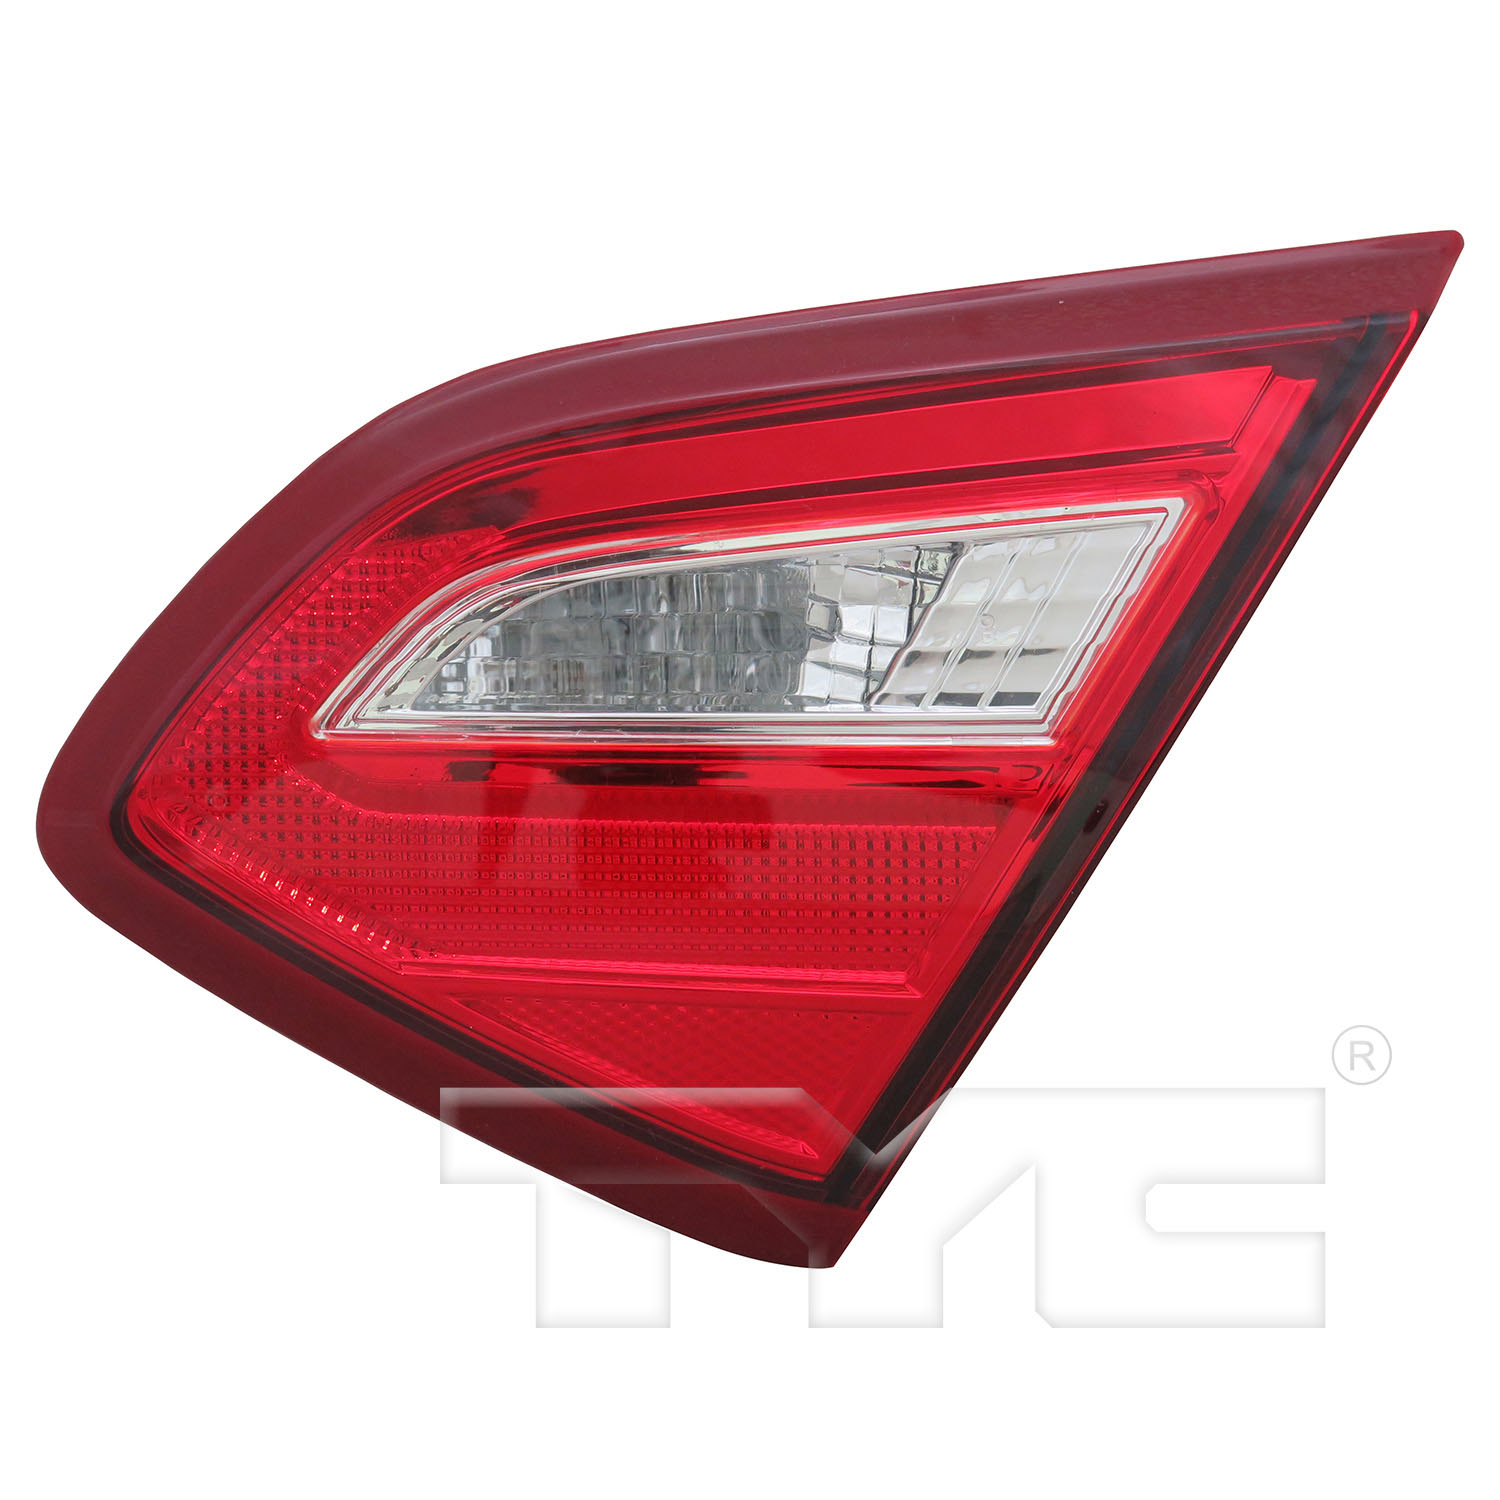 Aftermarket TAILLIGHTS for NISSAN - ALTIMA, ALTIMA,16-17,RT Taillamp assy inner